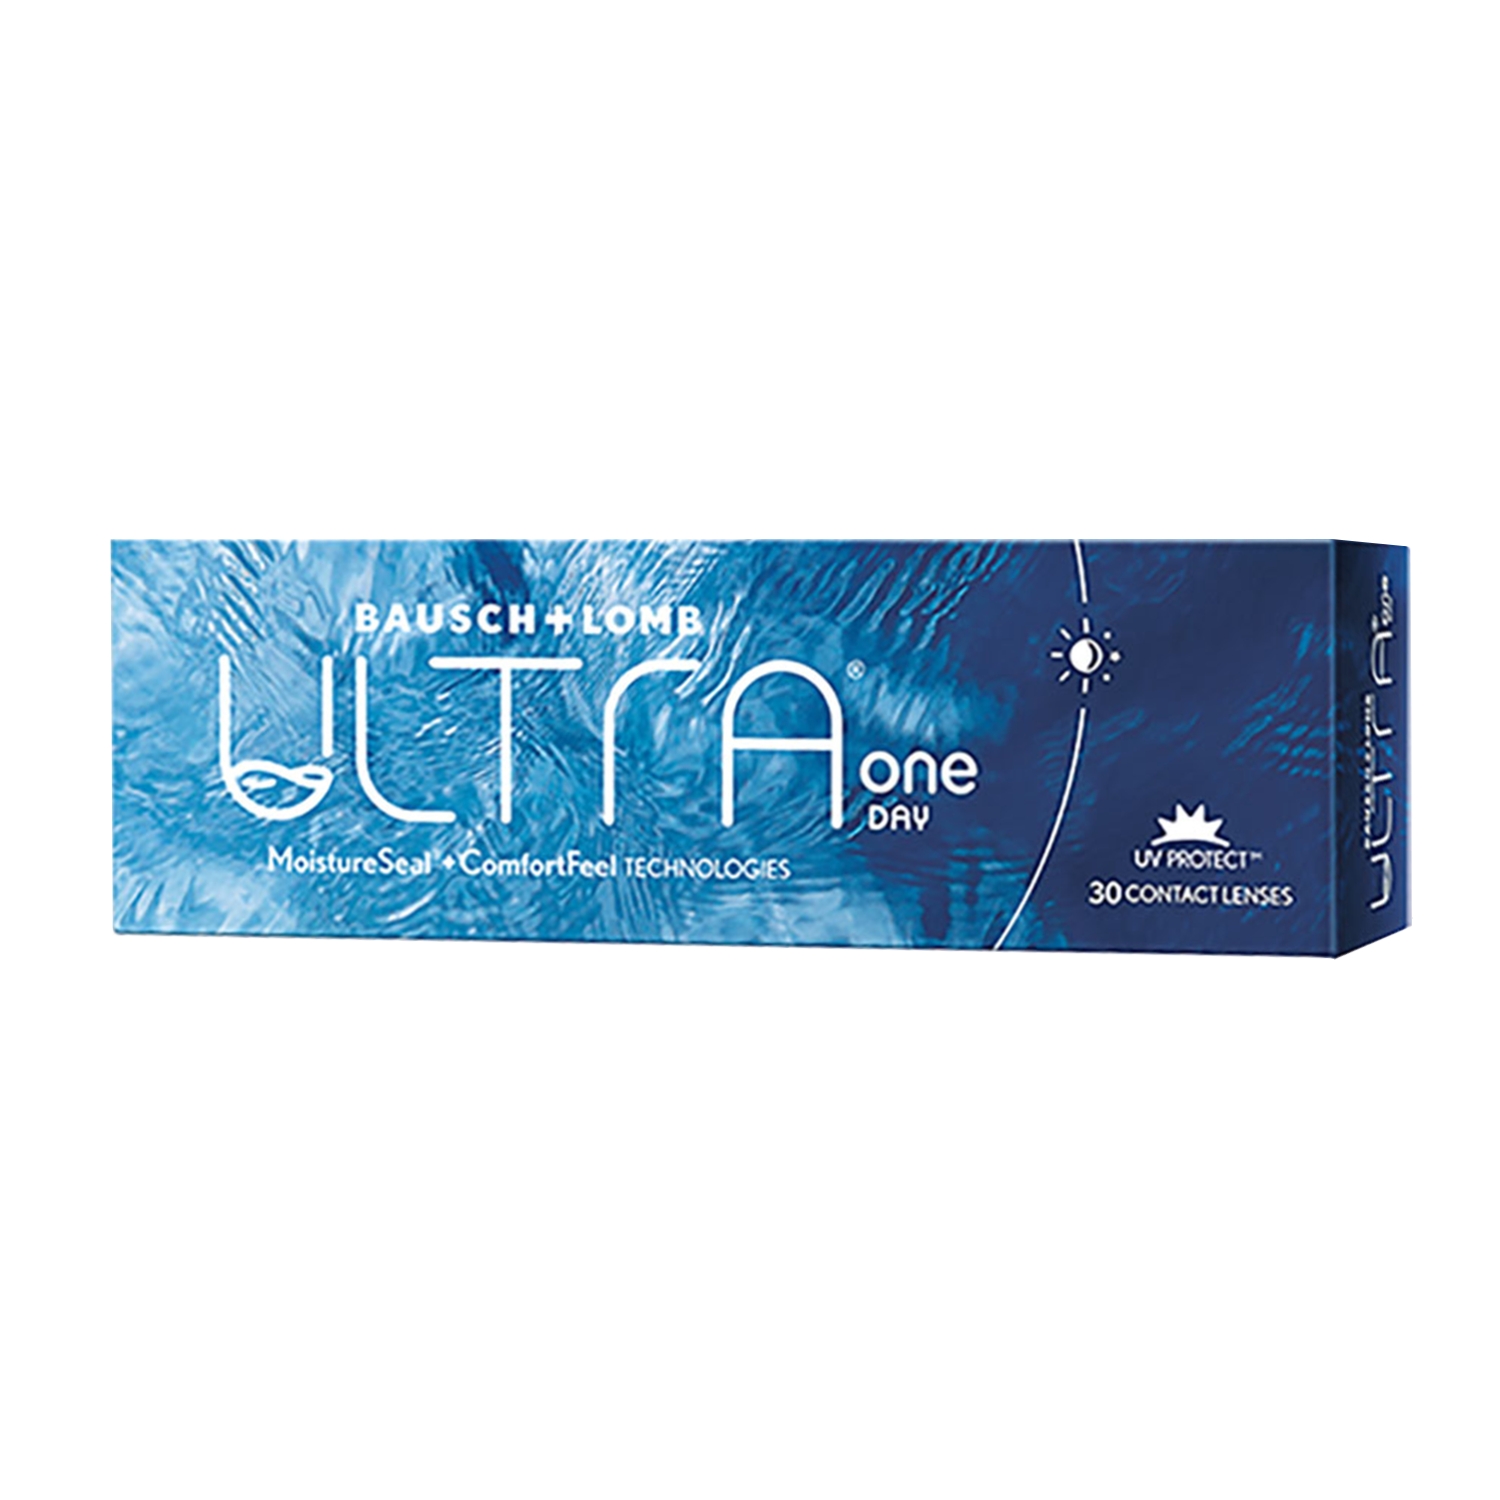 Ultra one day 30 pac